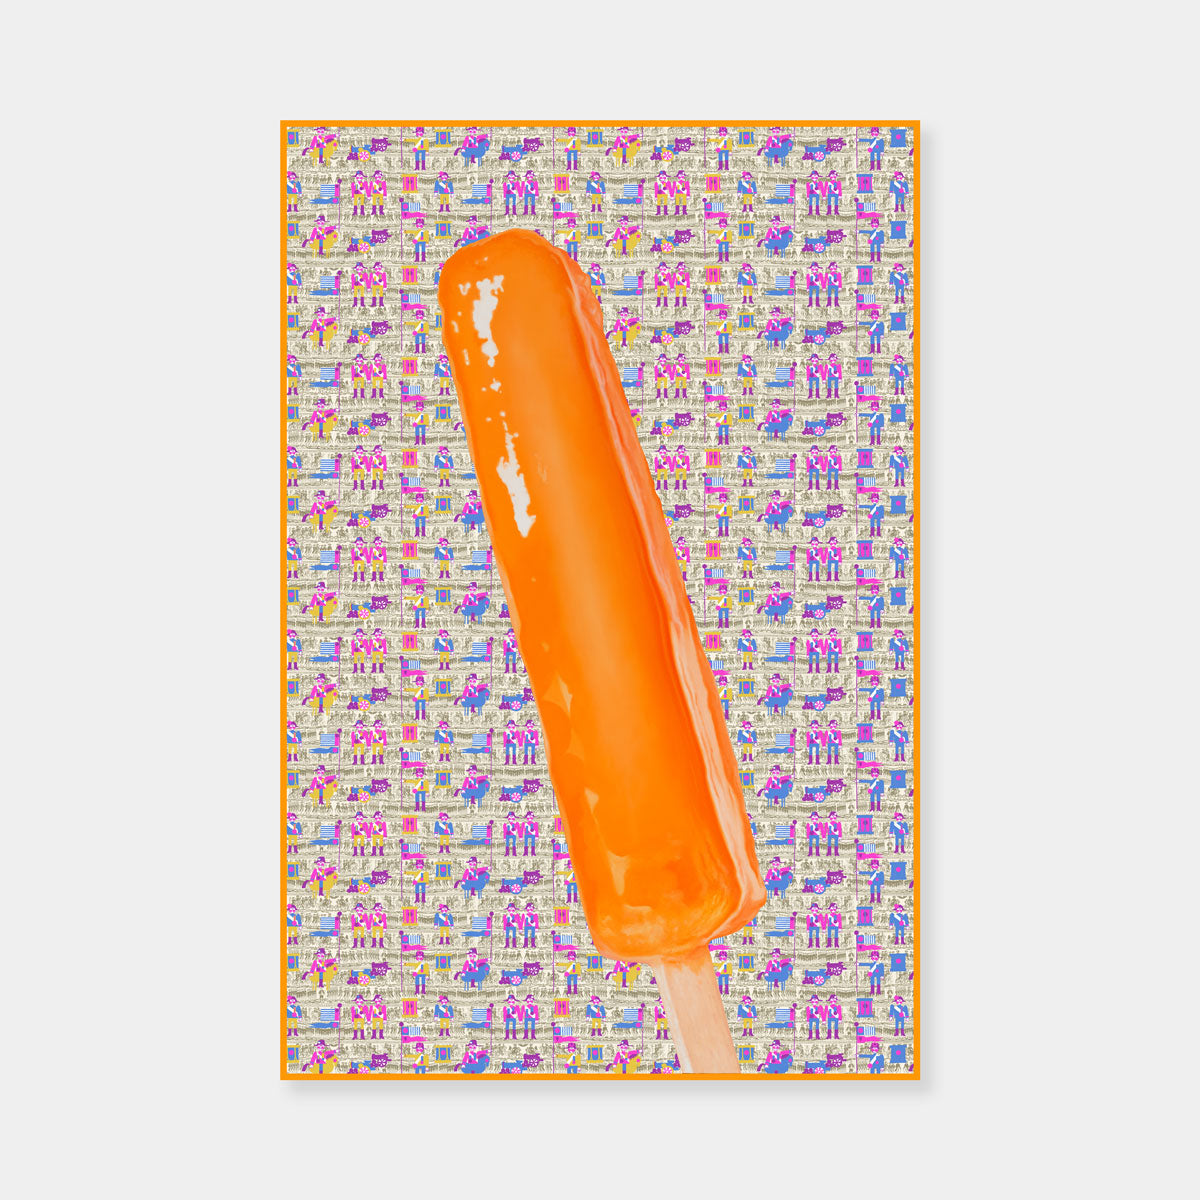 Jack Early Popsicle Limited Edition Multiple - Orange - Limited Edition Print - 36 x 24 inches.  Early's lexicon is drawn from wondrous childhood memories, where ordinary things and events can leave long-lasting impressions and he composes experiences to communicate sweet remembrances of simpler times.